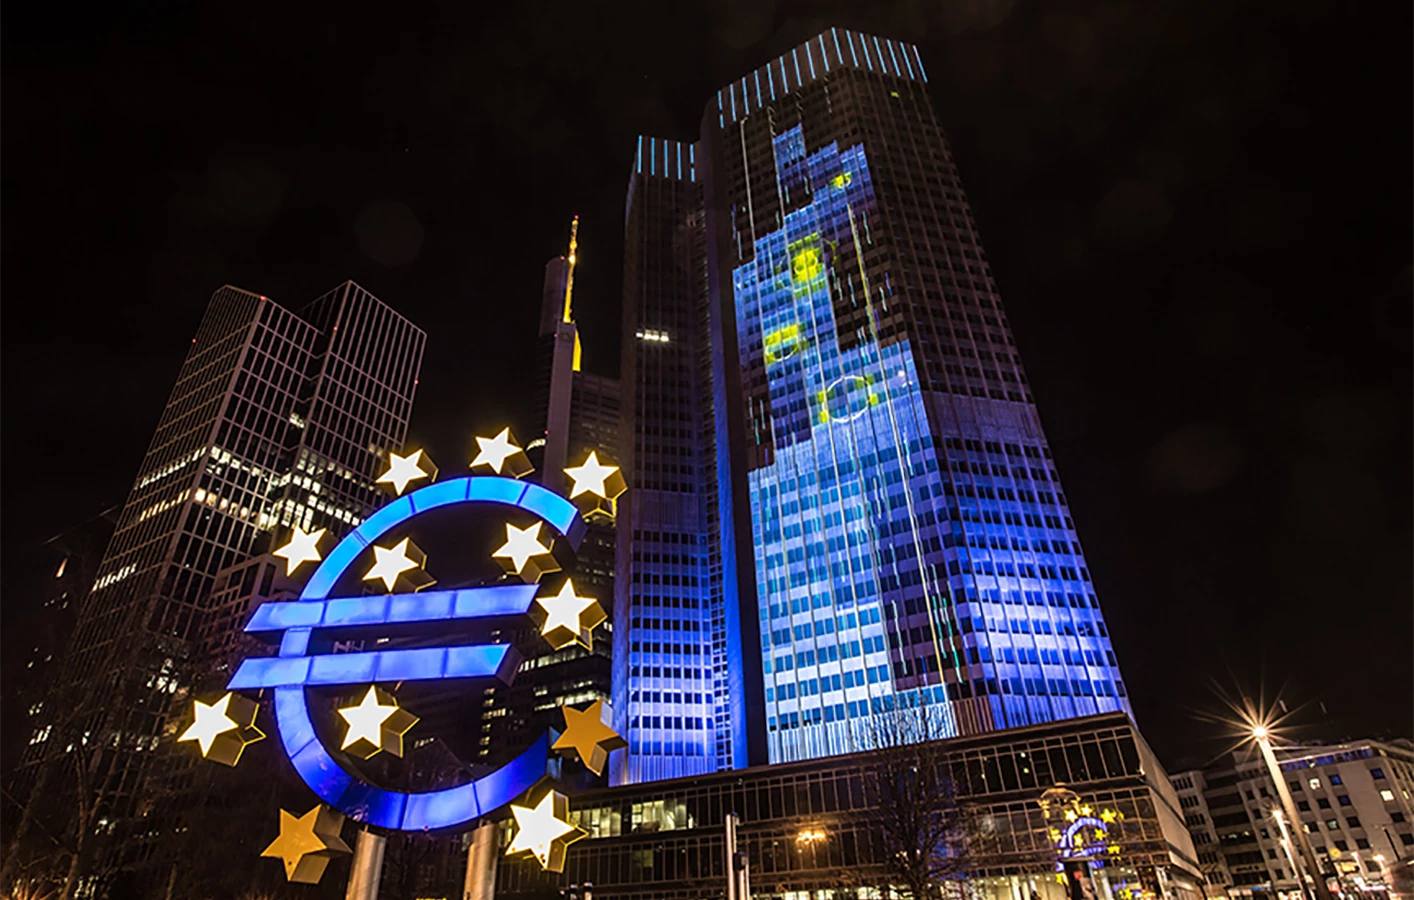 ECB official labels crypto as ‘deleterious’ with ‘no societal benefits’ in scathing speech